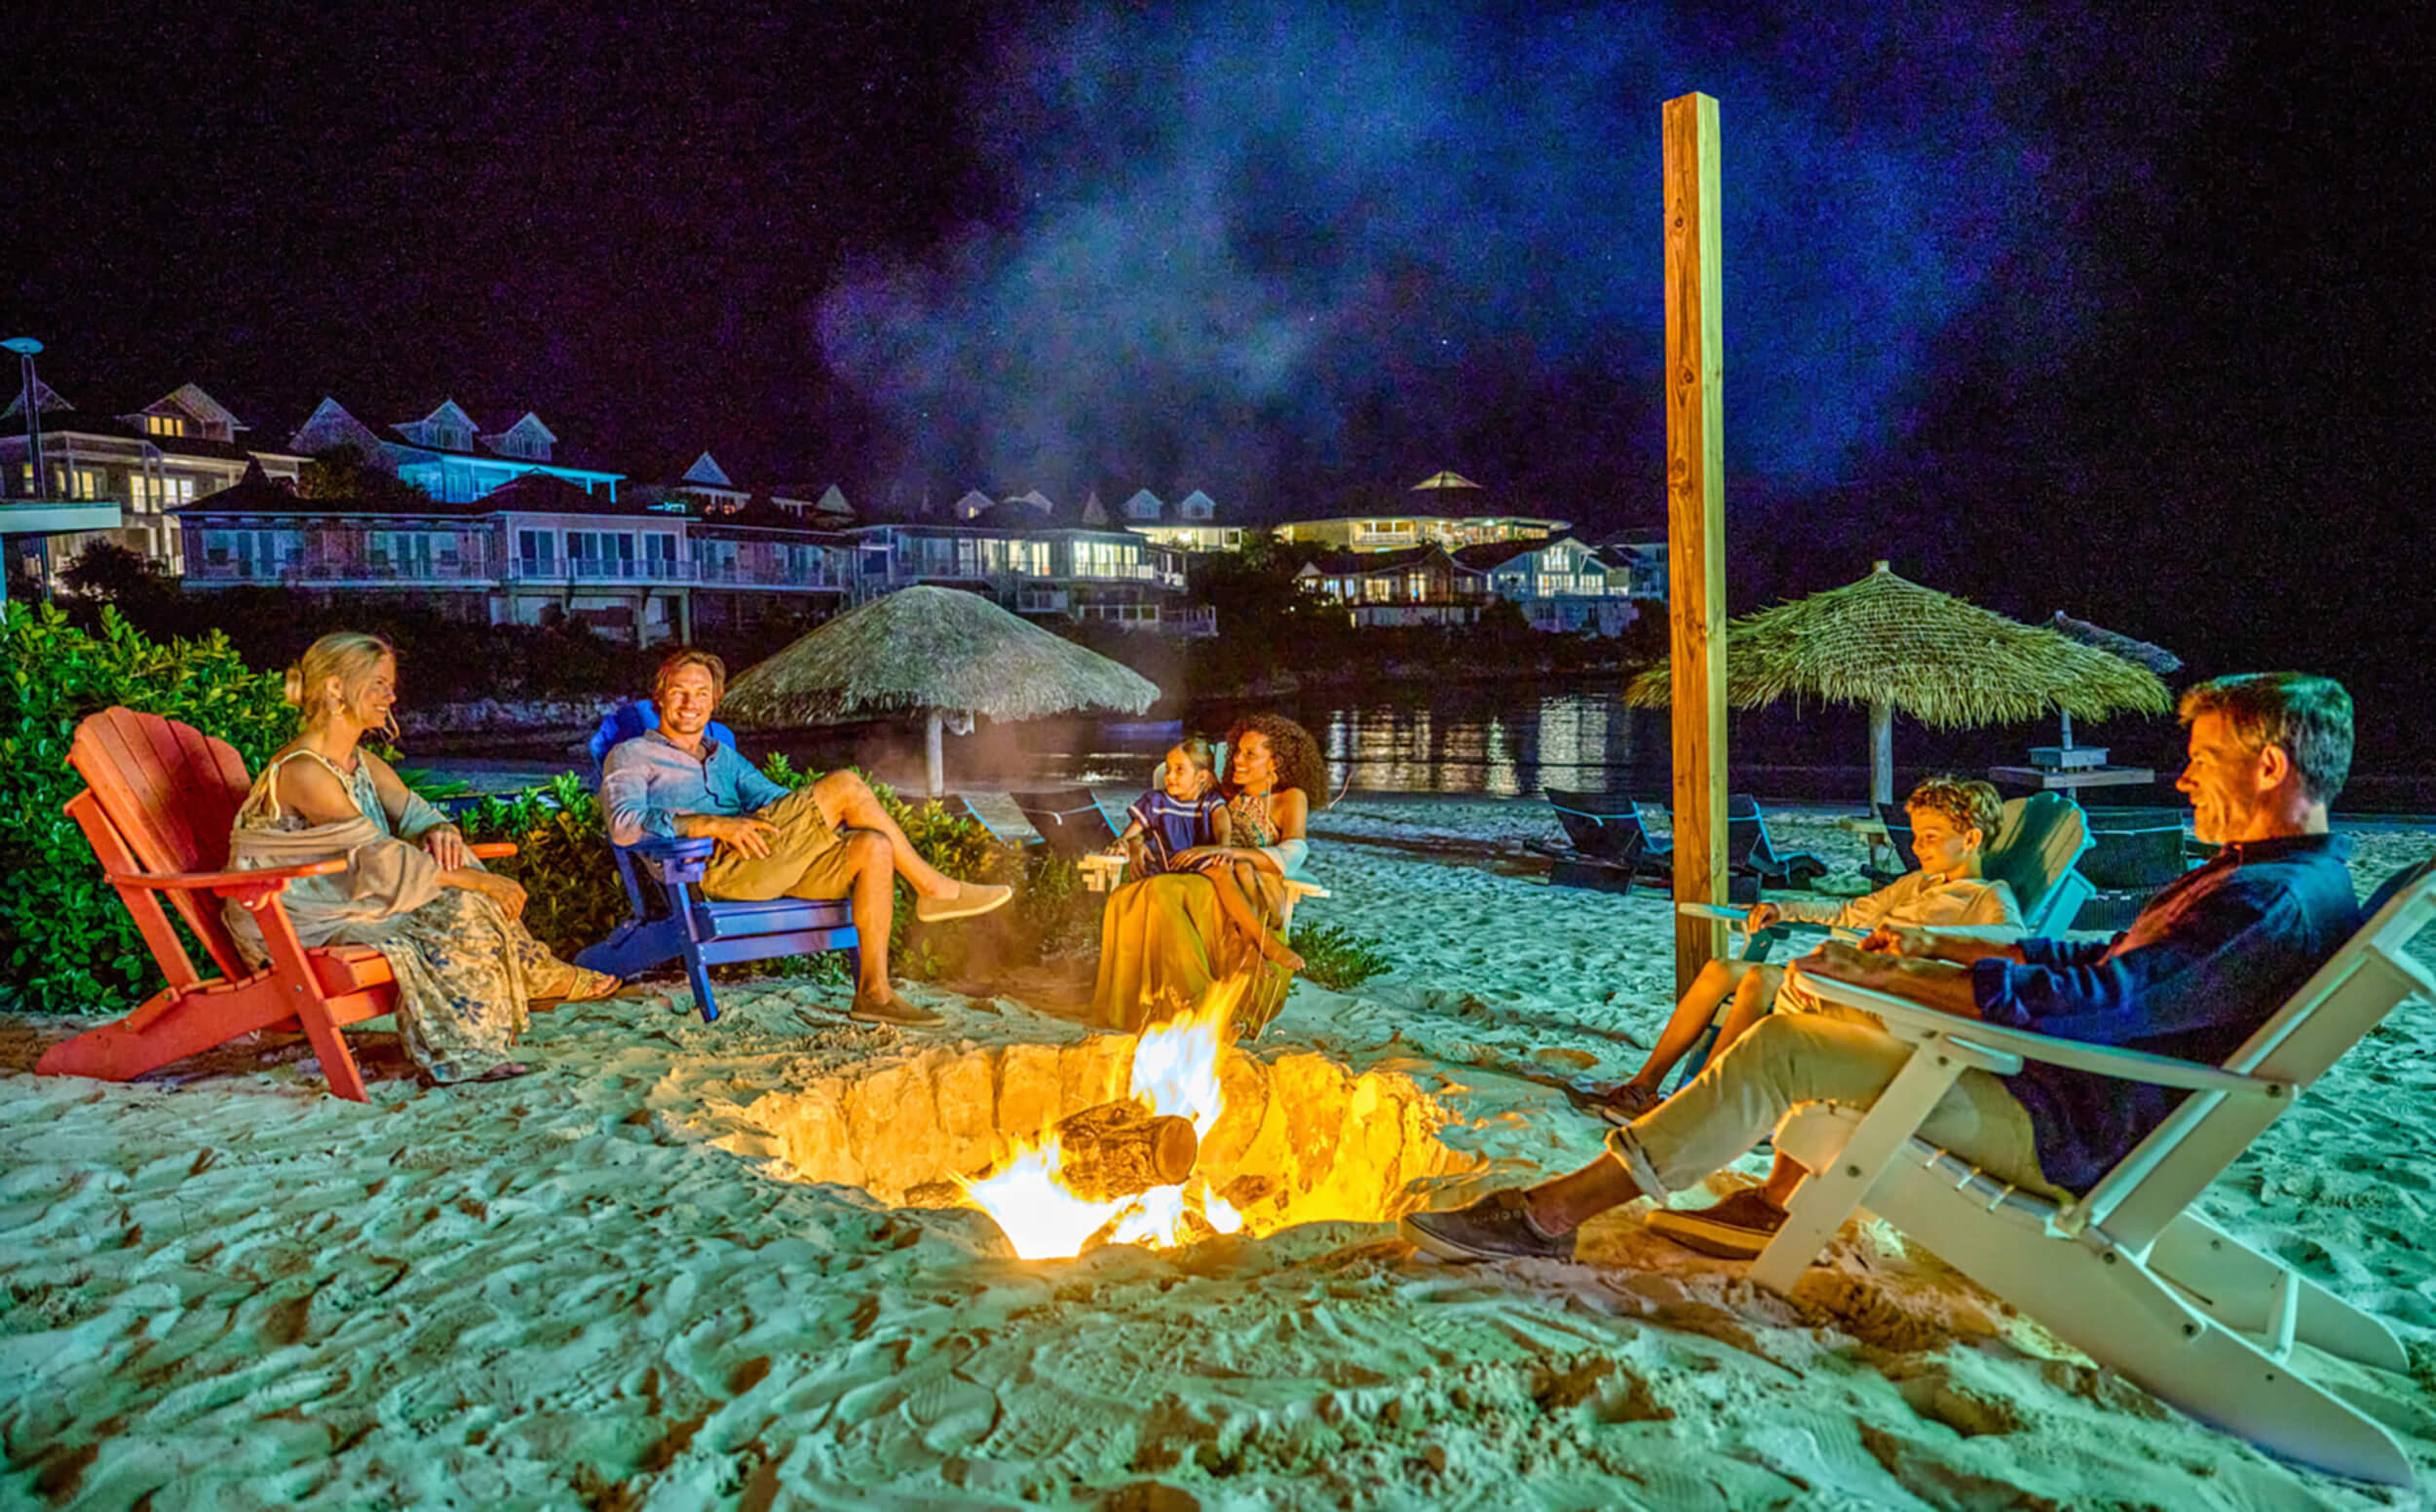 Friends gathered around a beach bonfire at night at The Abaco Club.